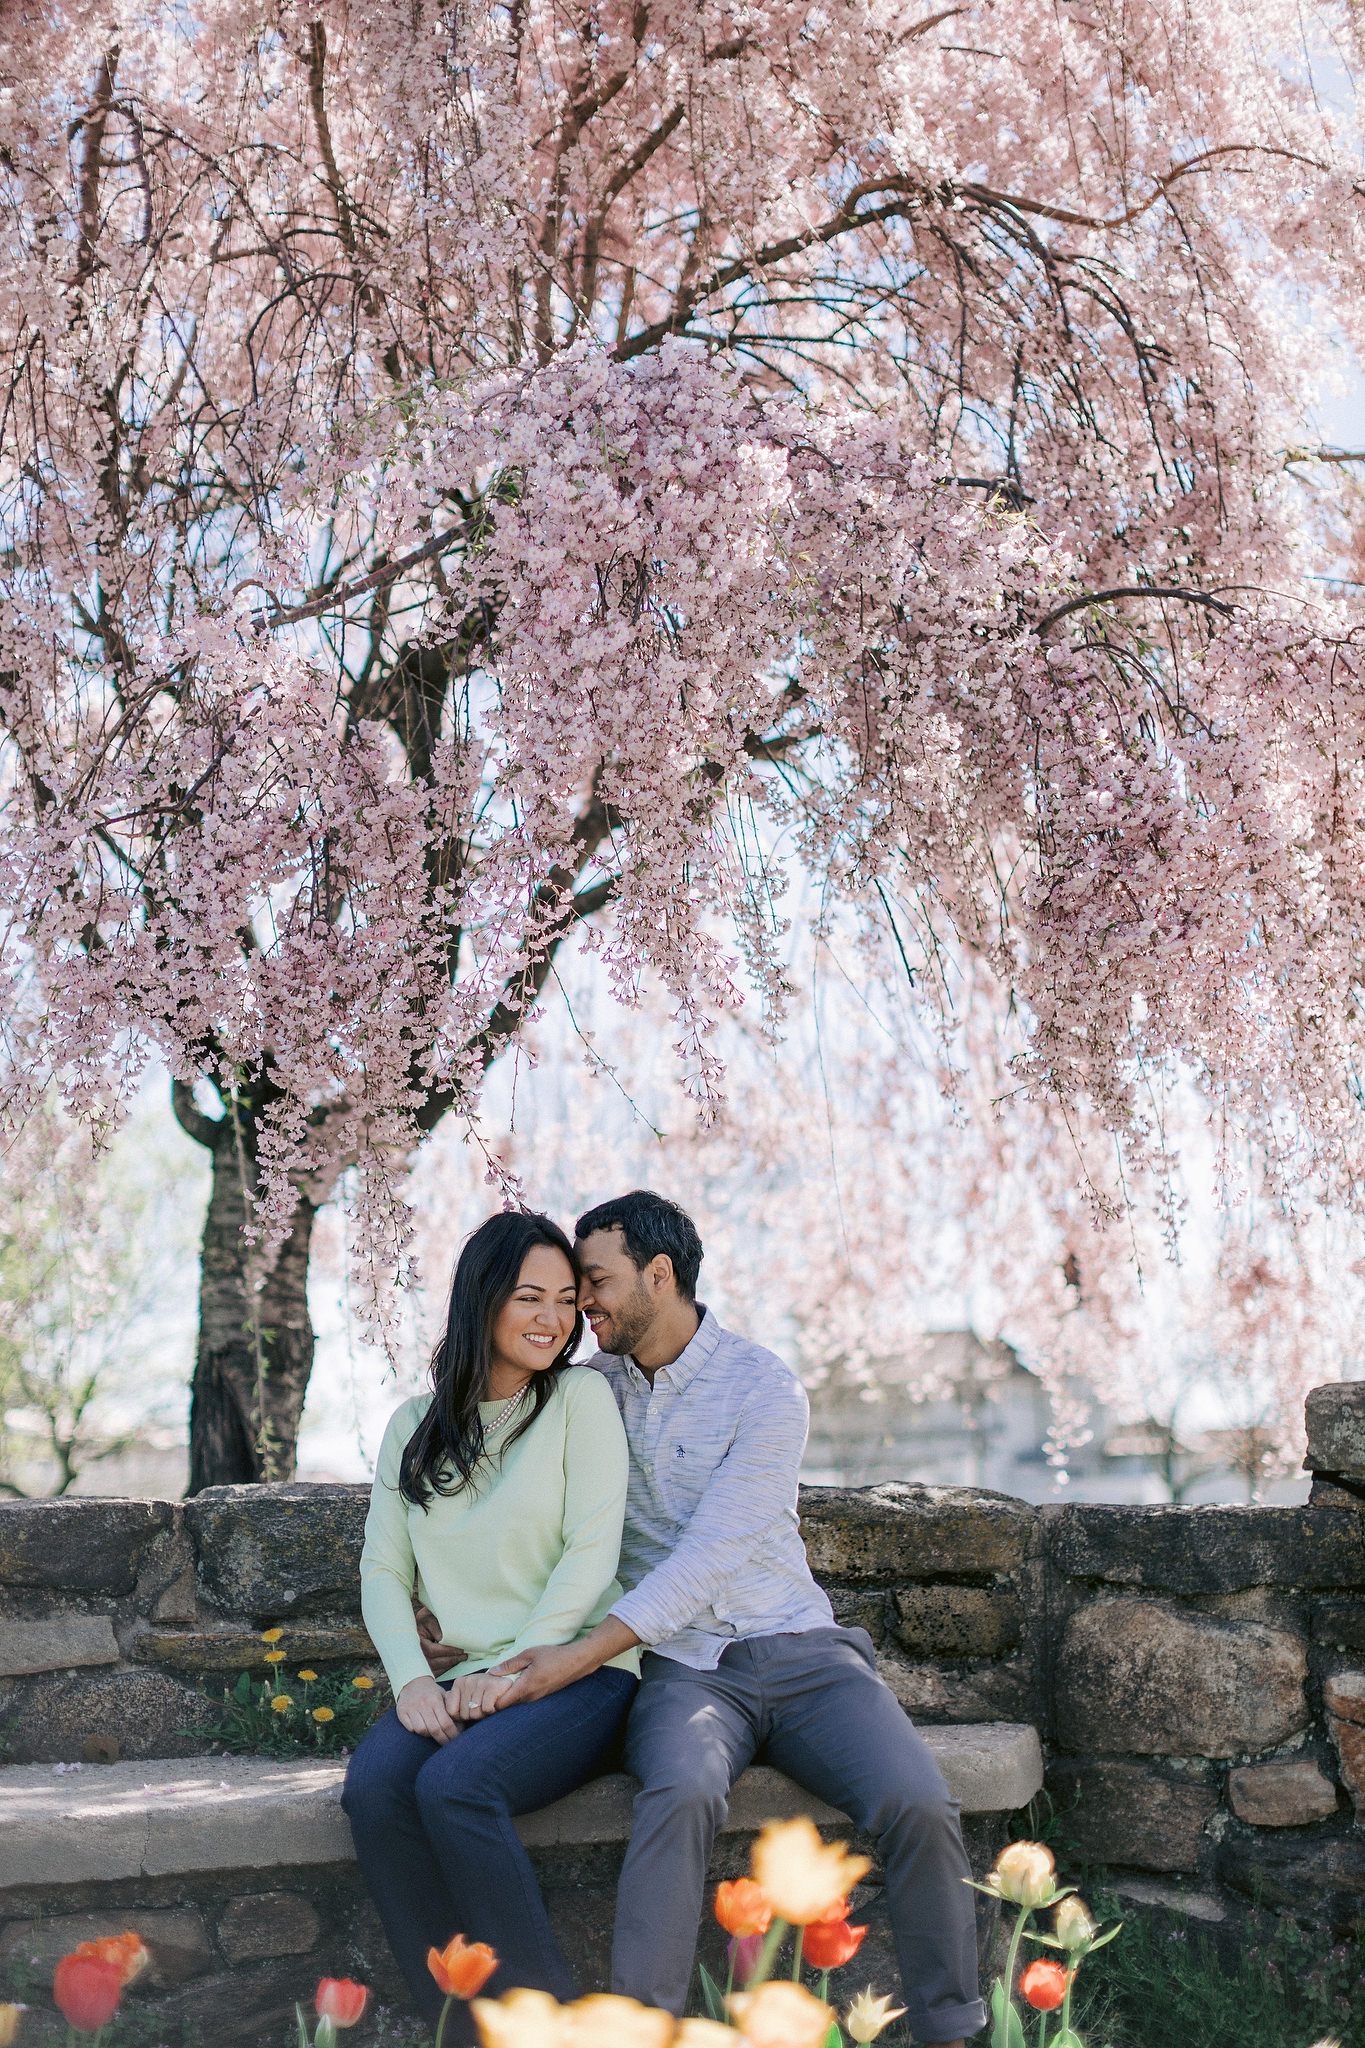 The couple are lovingly sitting on a stone bench under the cherry blossom tree. NYC spring engagement Image by Jenny Fu Studio